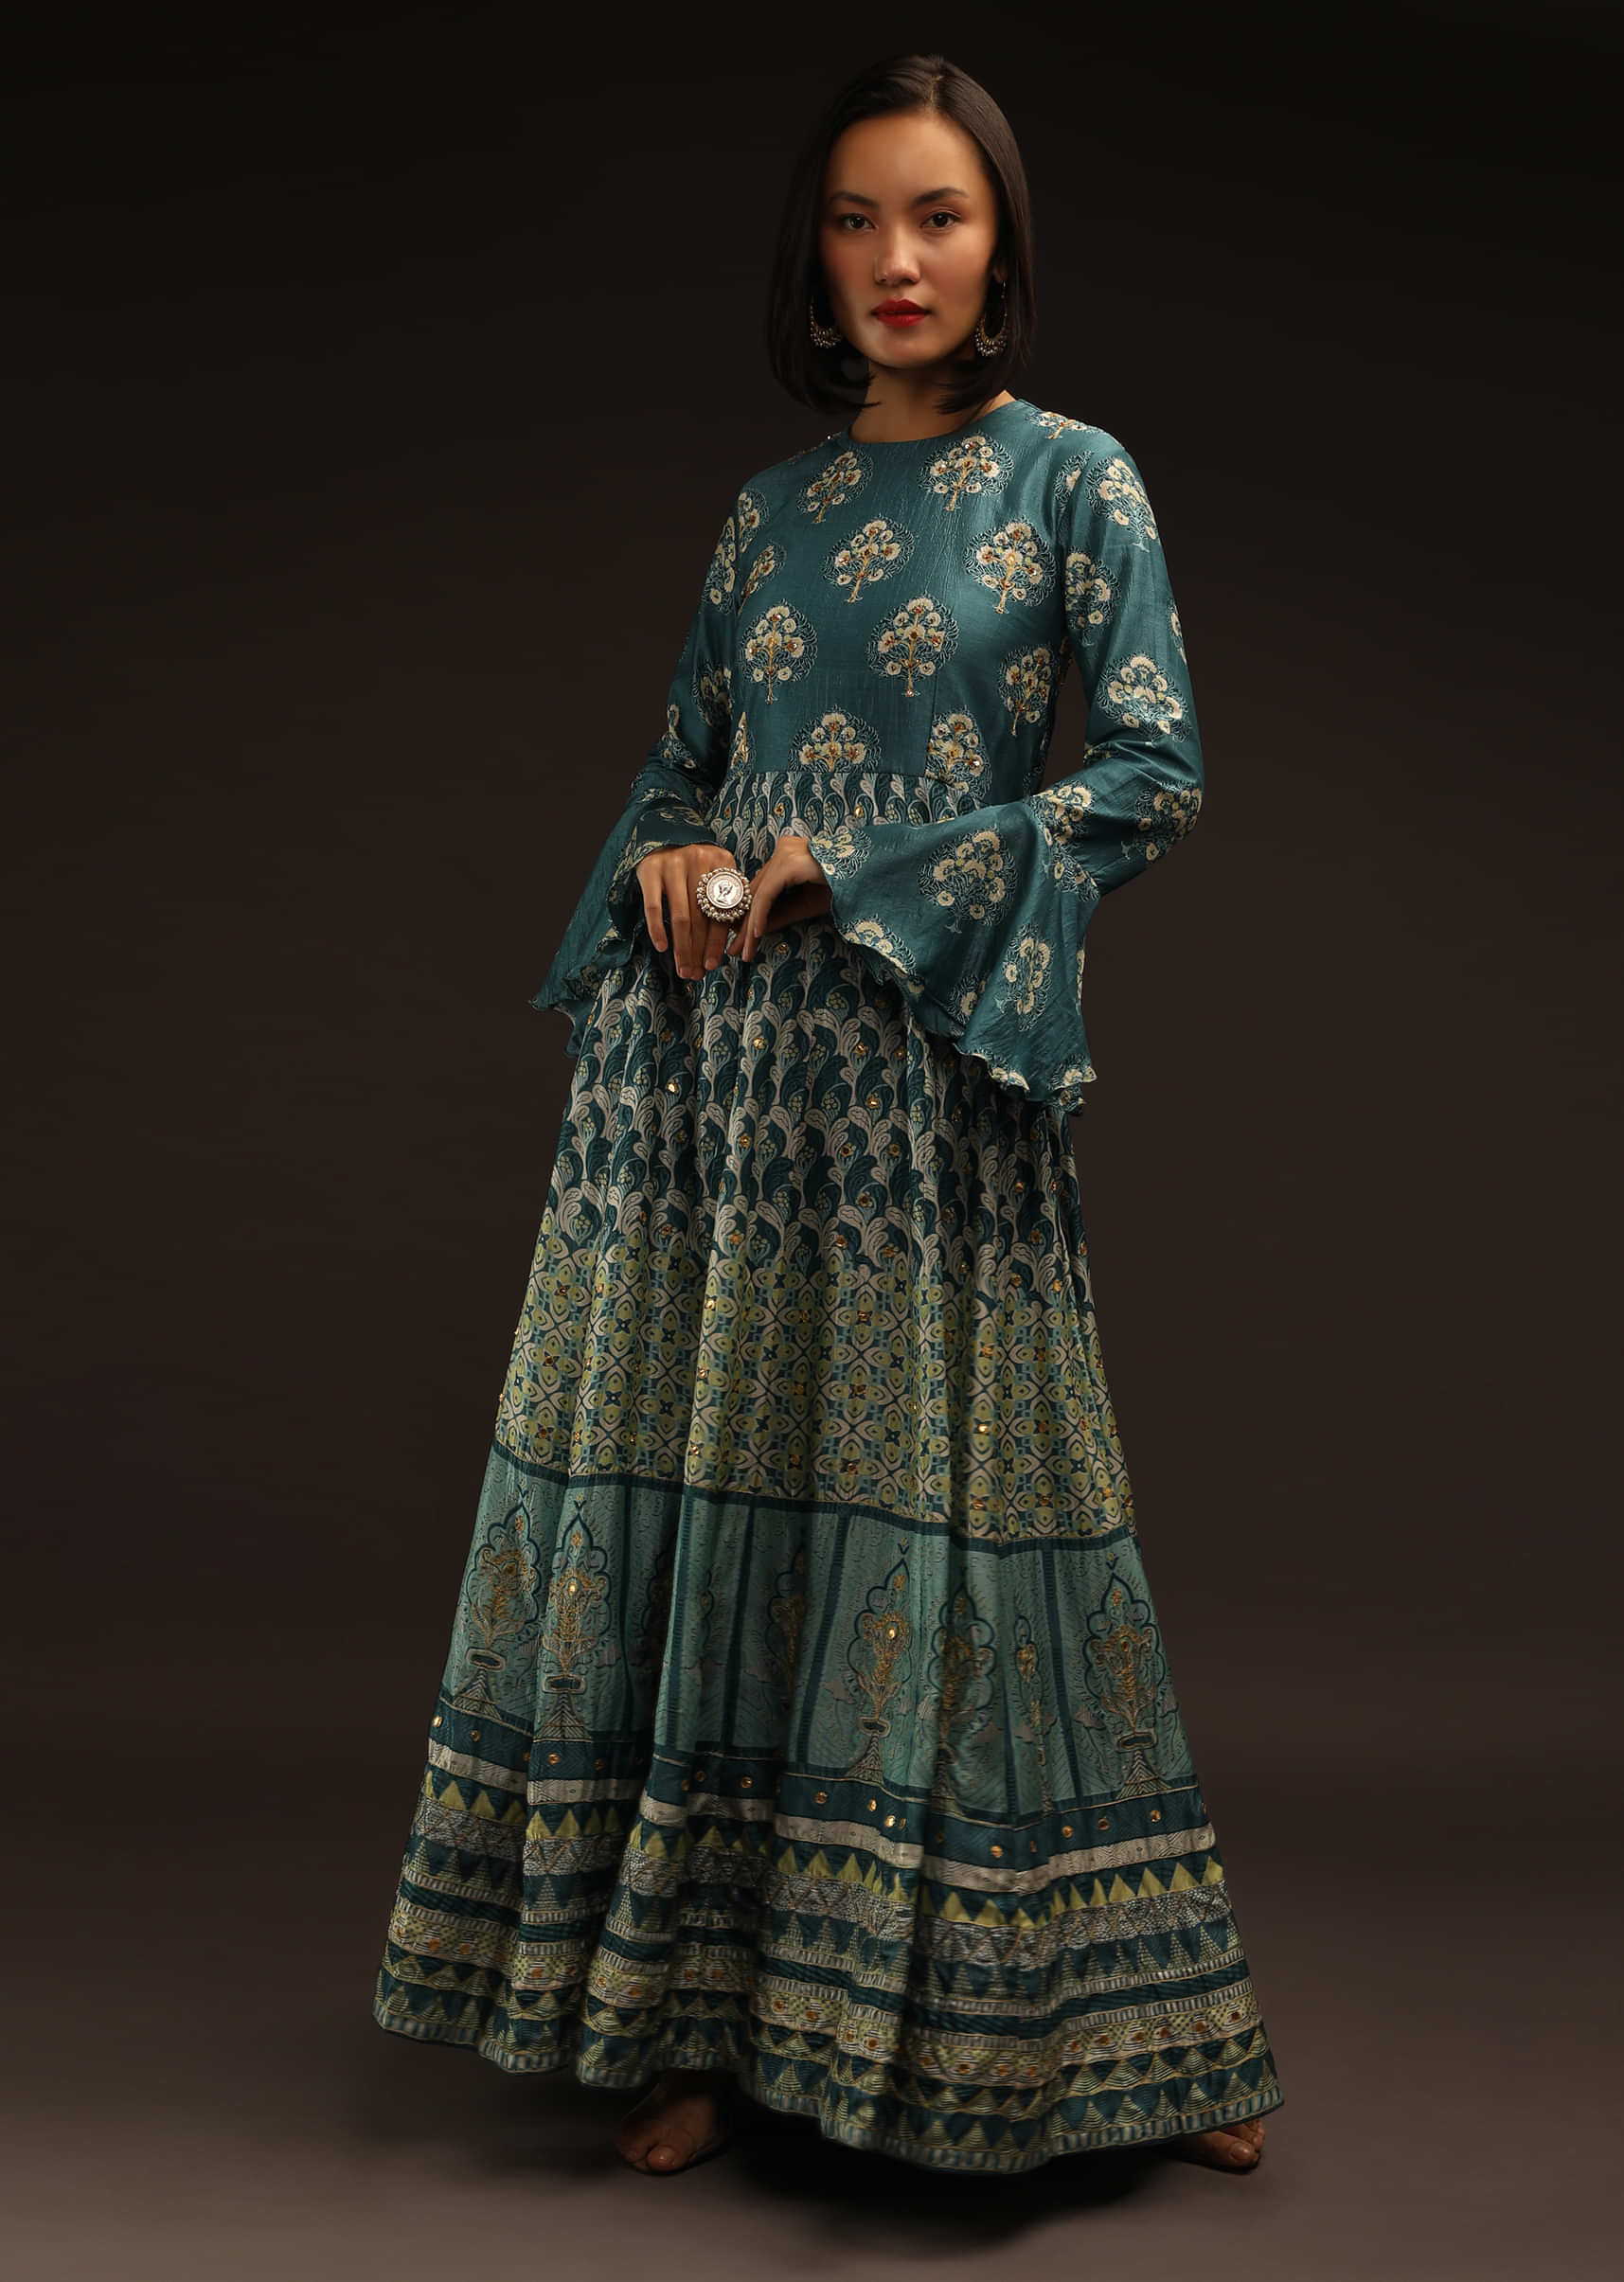 Hydro Blue Anarkali Dress In Silk With Jaipuri Print, Frill Sleeves And Gotta Patti Accents